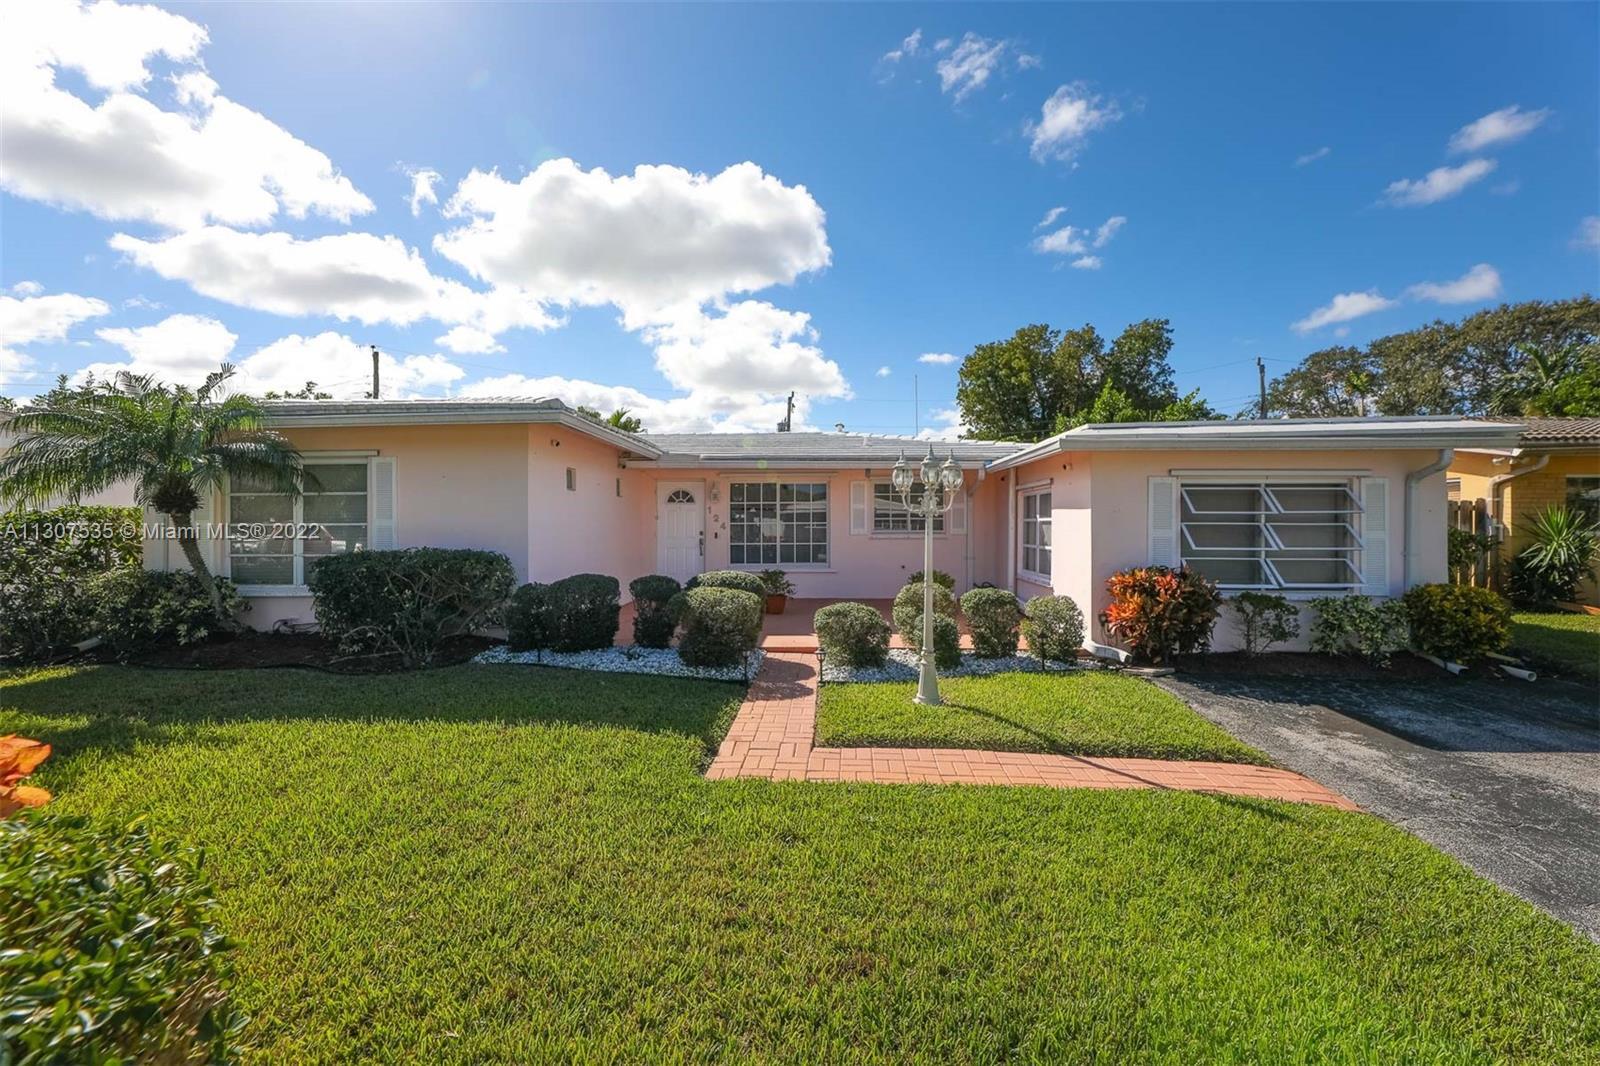 Tucked Away on A Quiet Street in One of Wilton Manors' Most Sought Out Neighborhoods.  This Lovely H